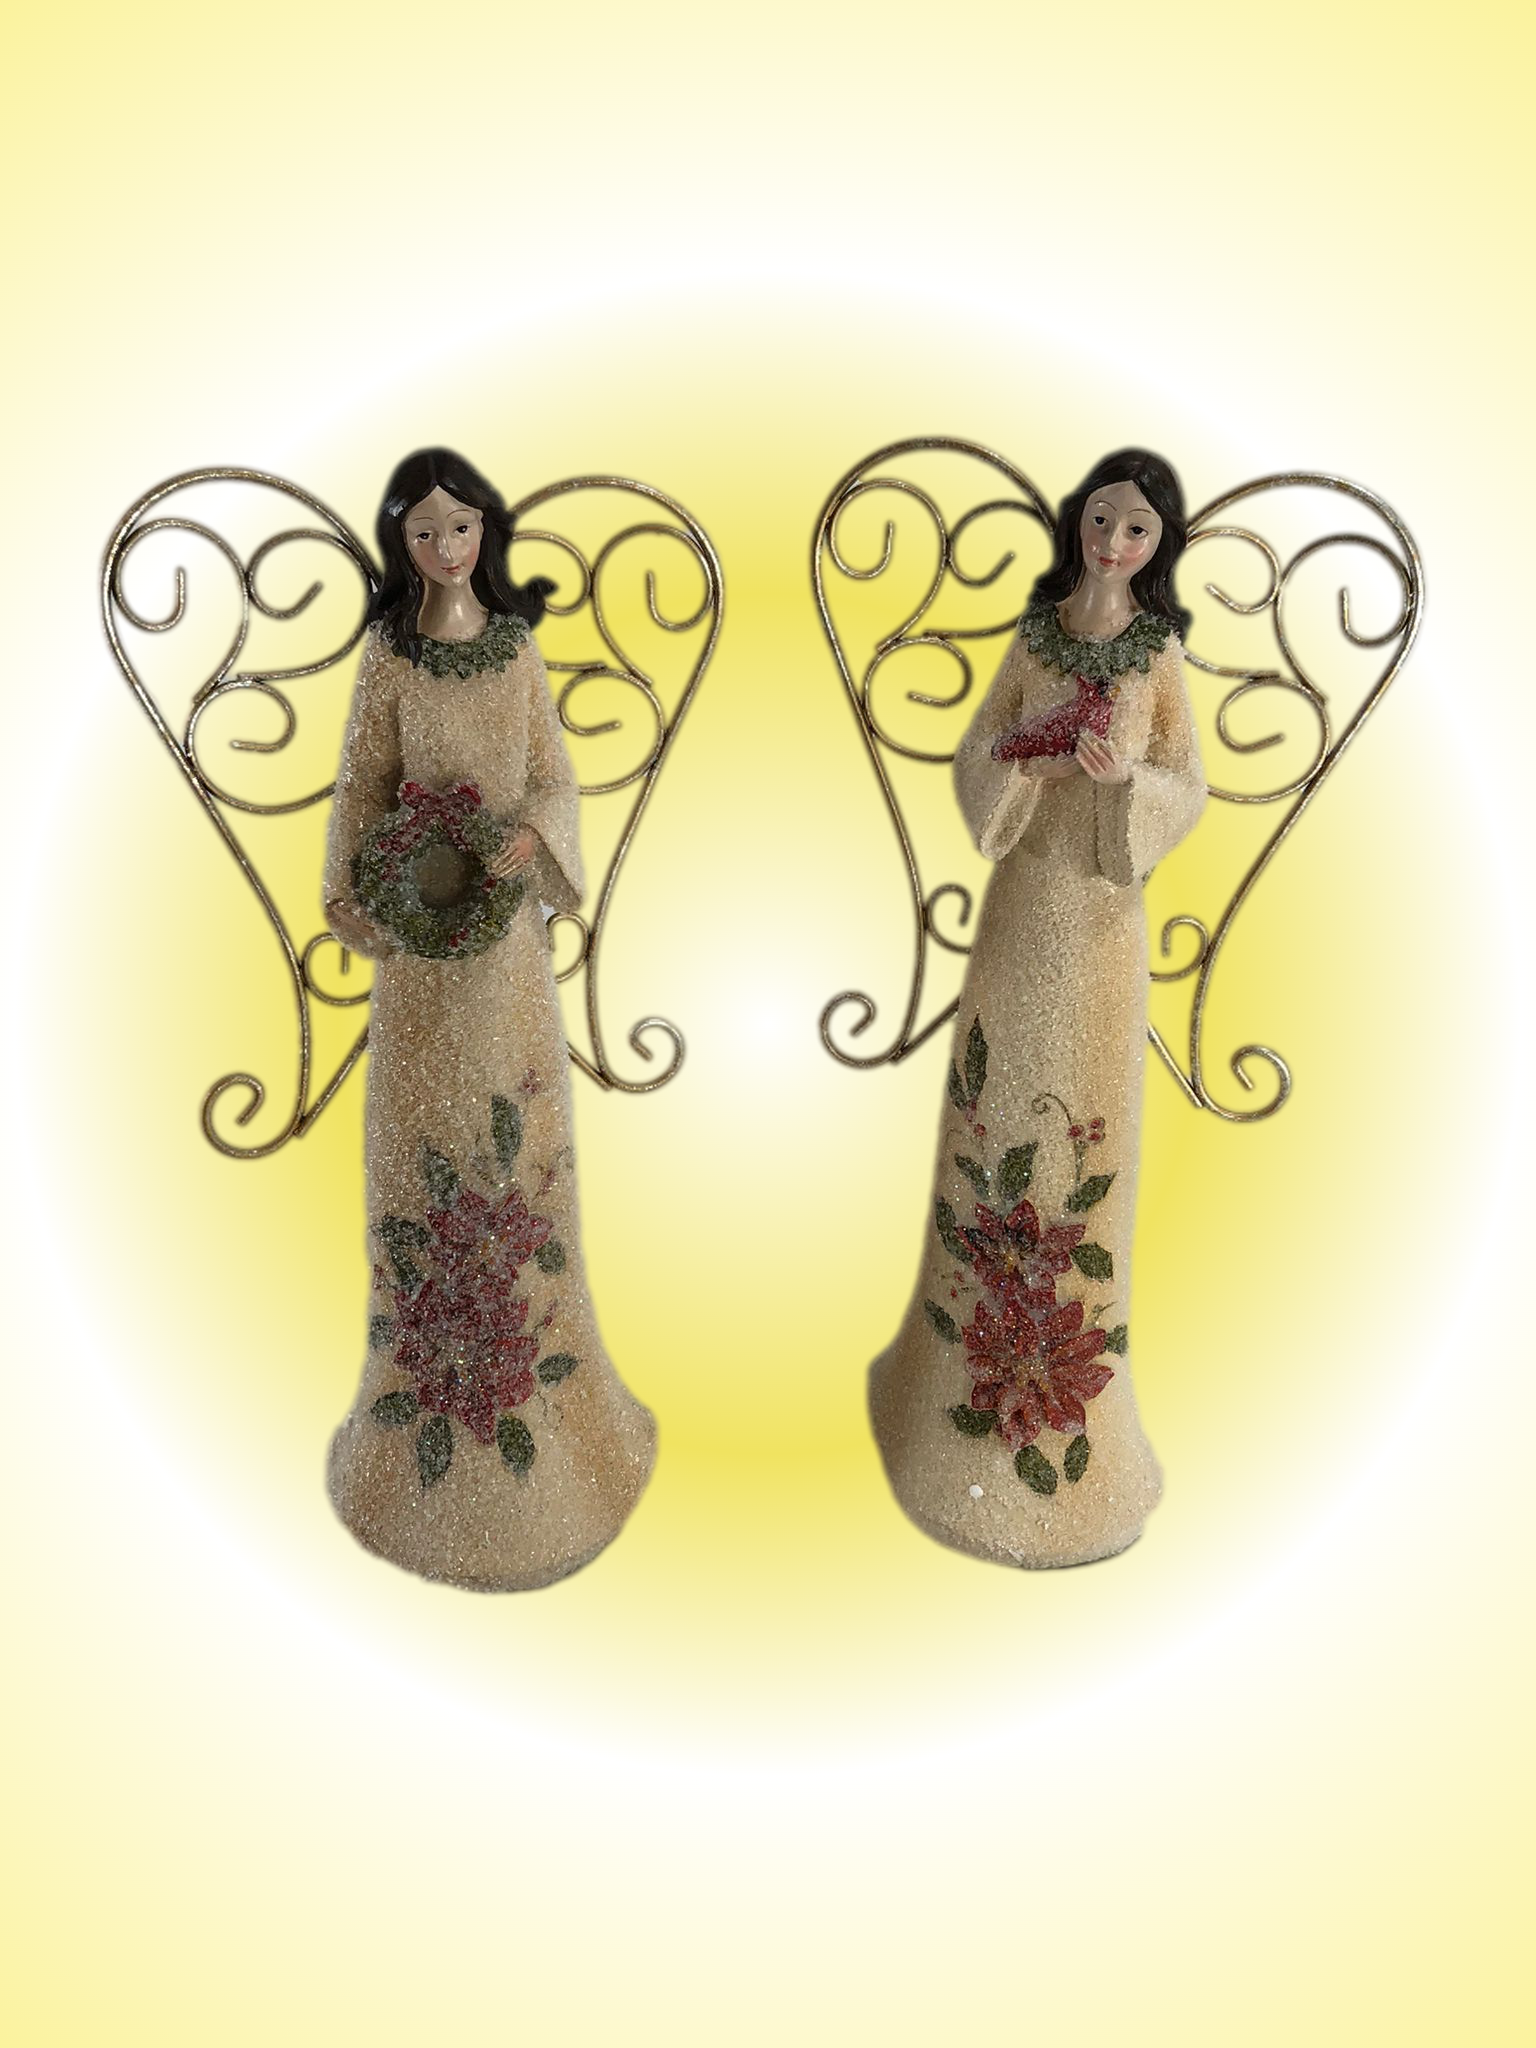 12" Angel Figurine One Holding a Cardinal and the other a Wreath - Pack of 2